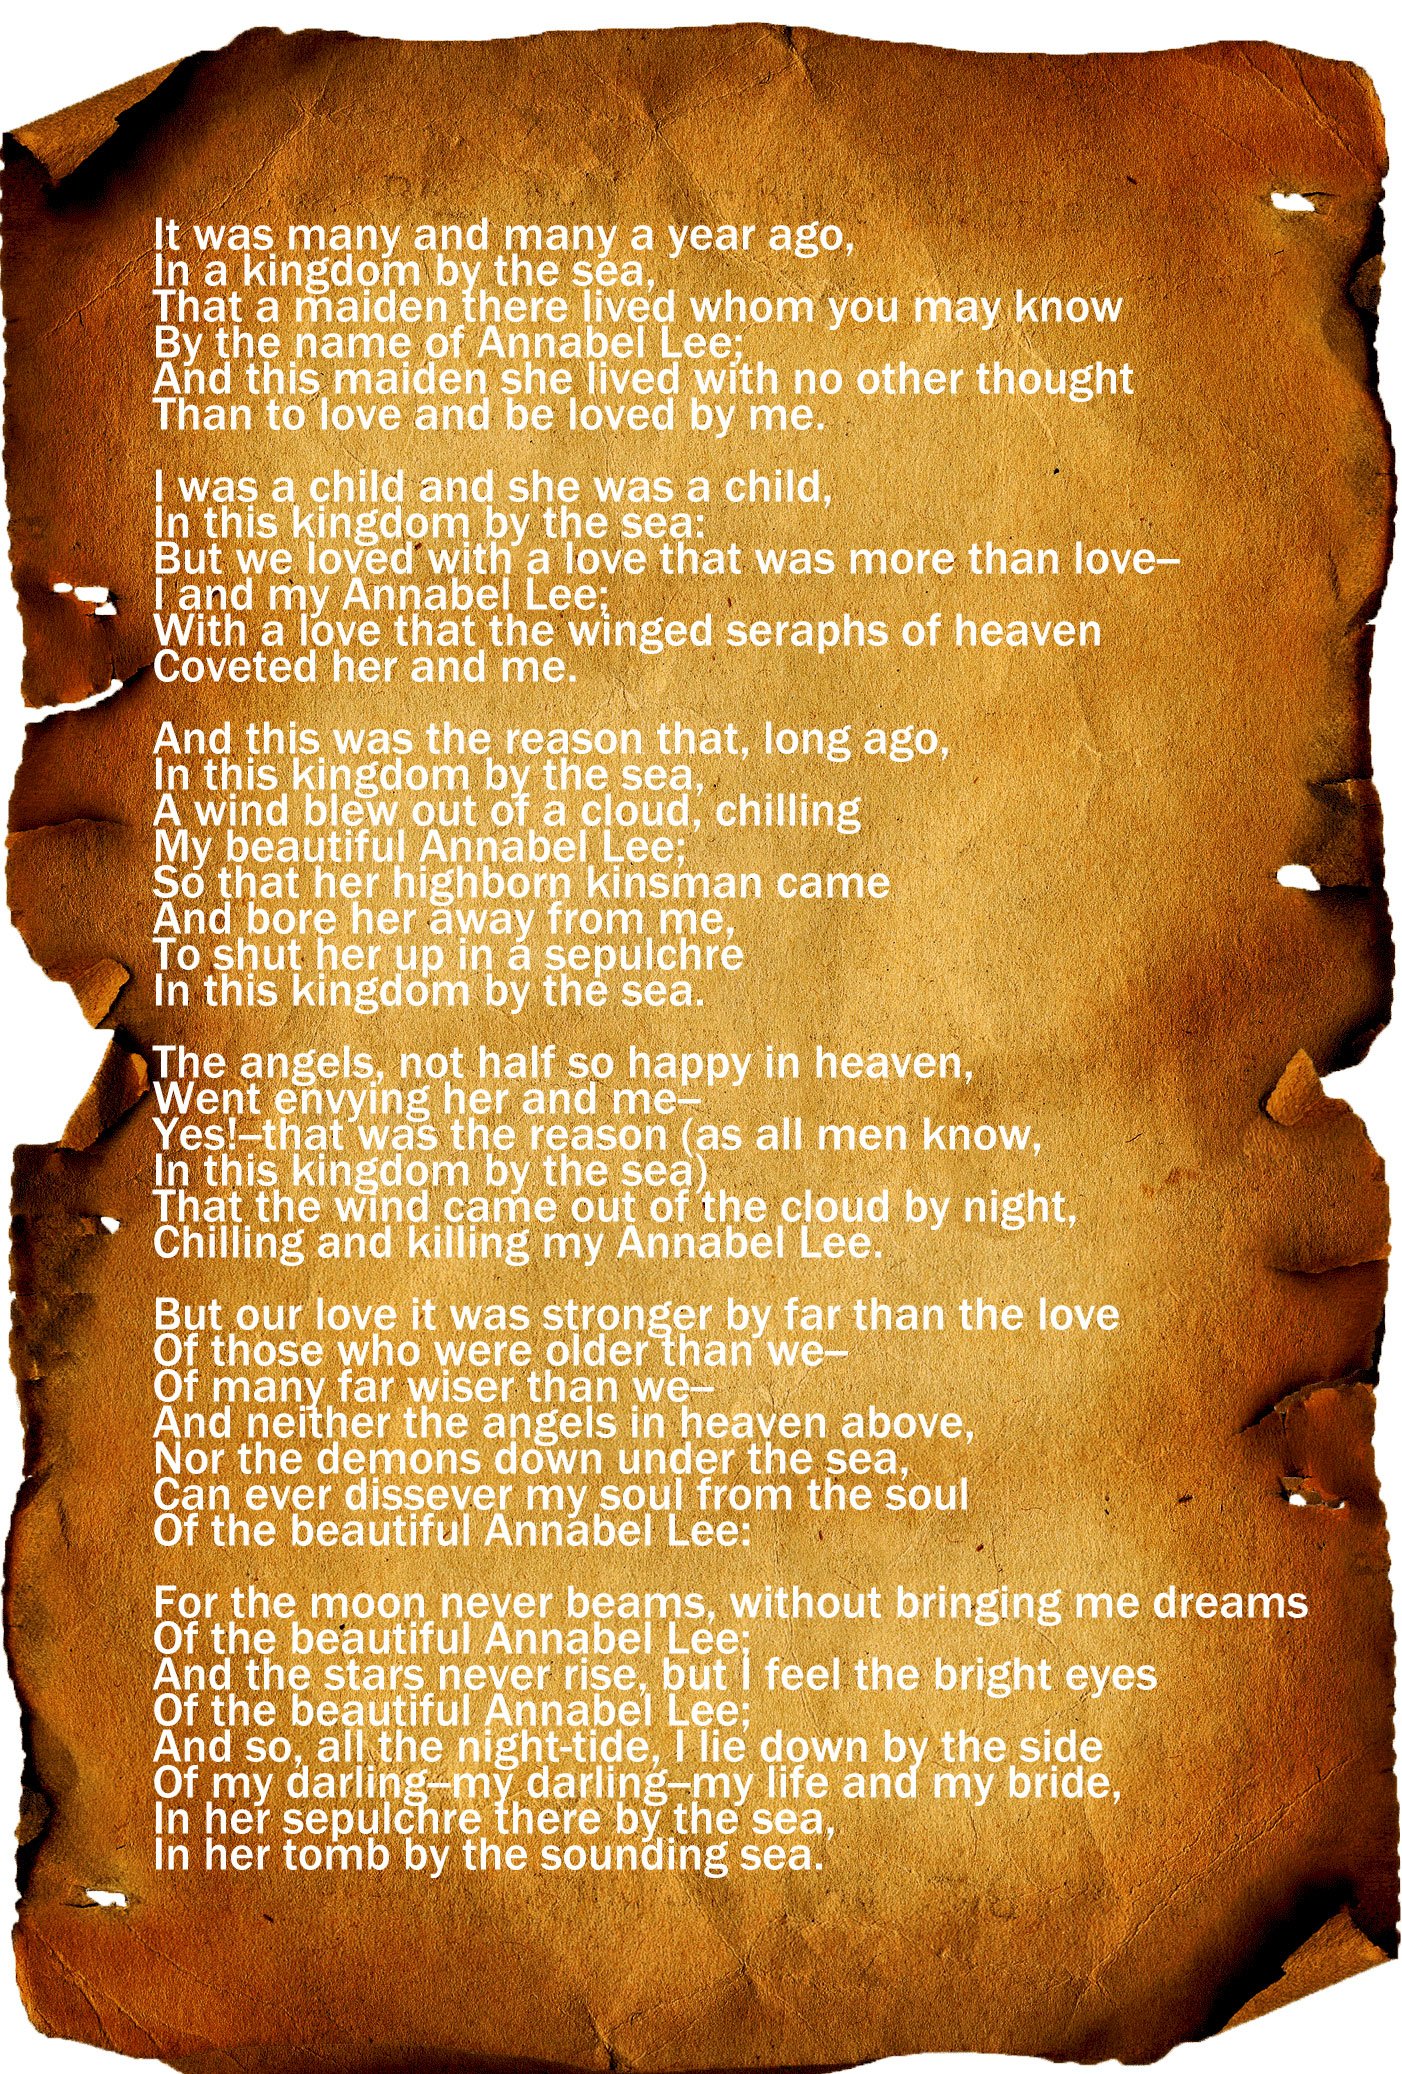 annabel lee poe text